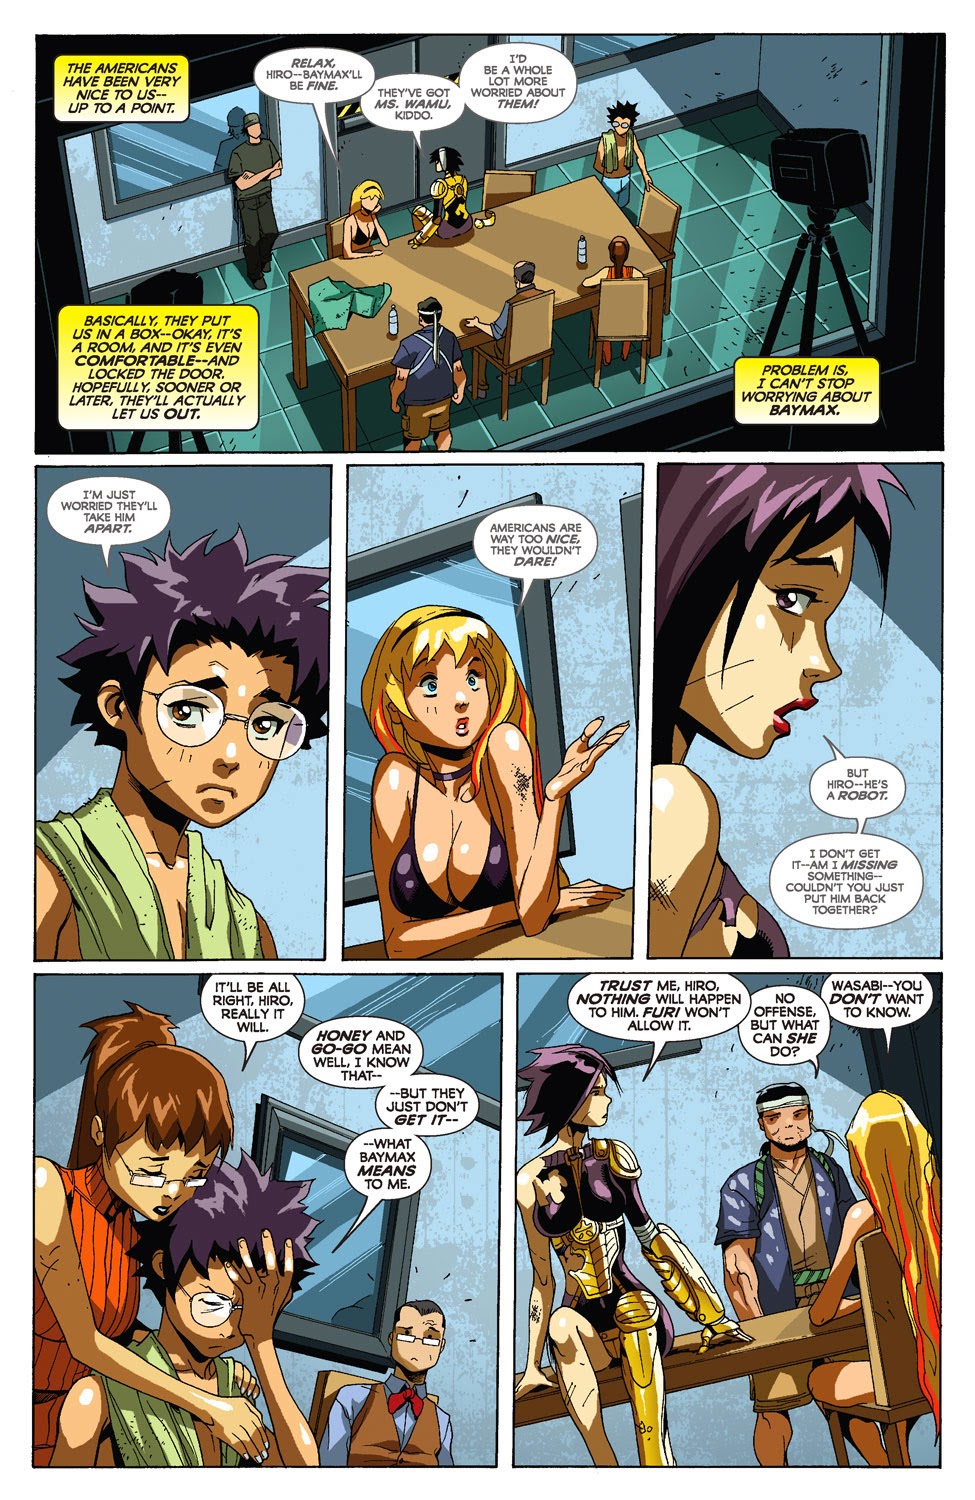 Big Hero 6 05 Of 05 2009 | Read Big Hero 6 05 Of 05 2009 comic online in  high quality. Read Full Comic online for free - Read comics online in high  quality .